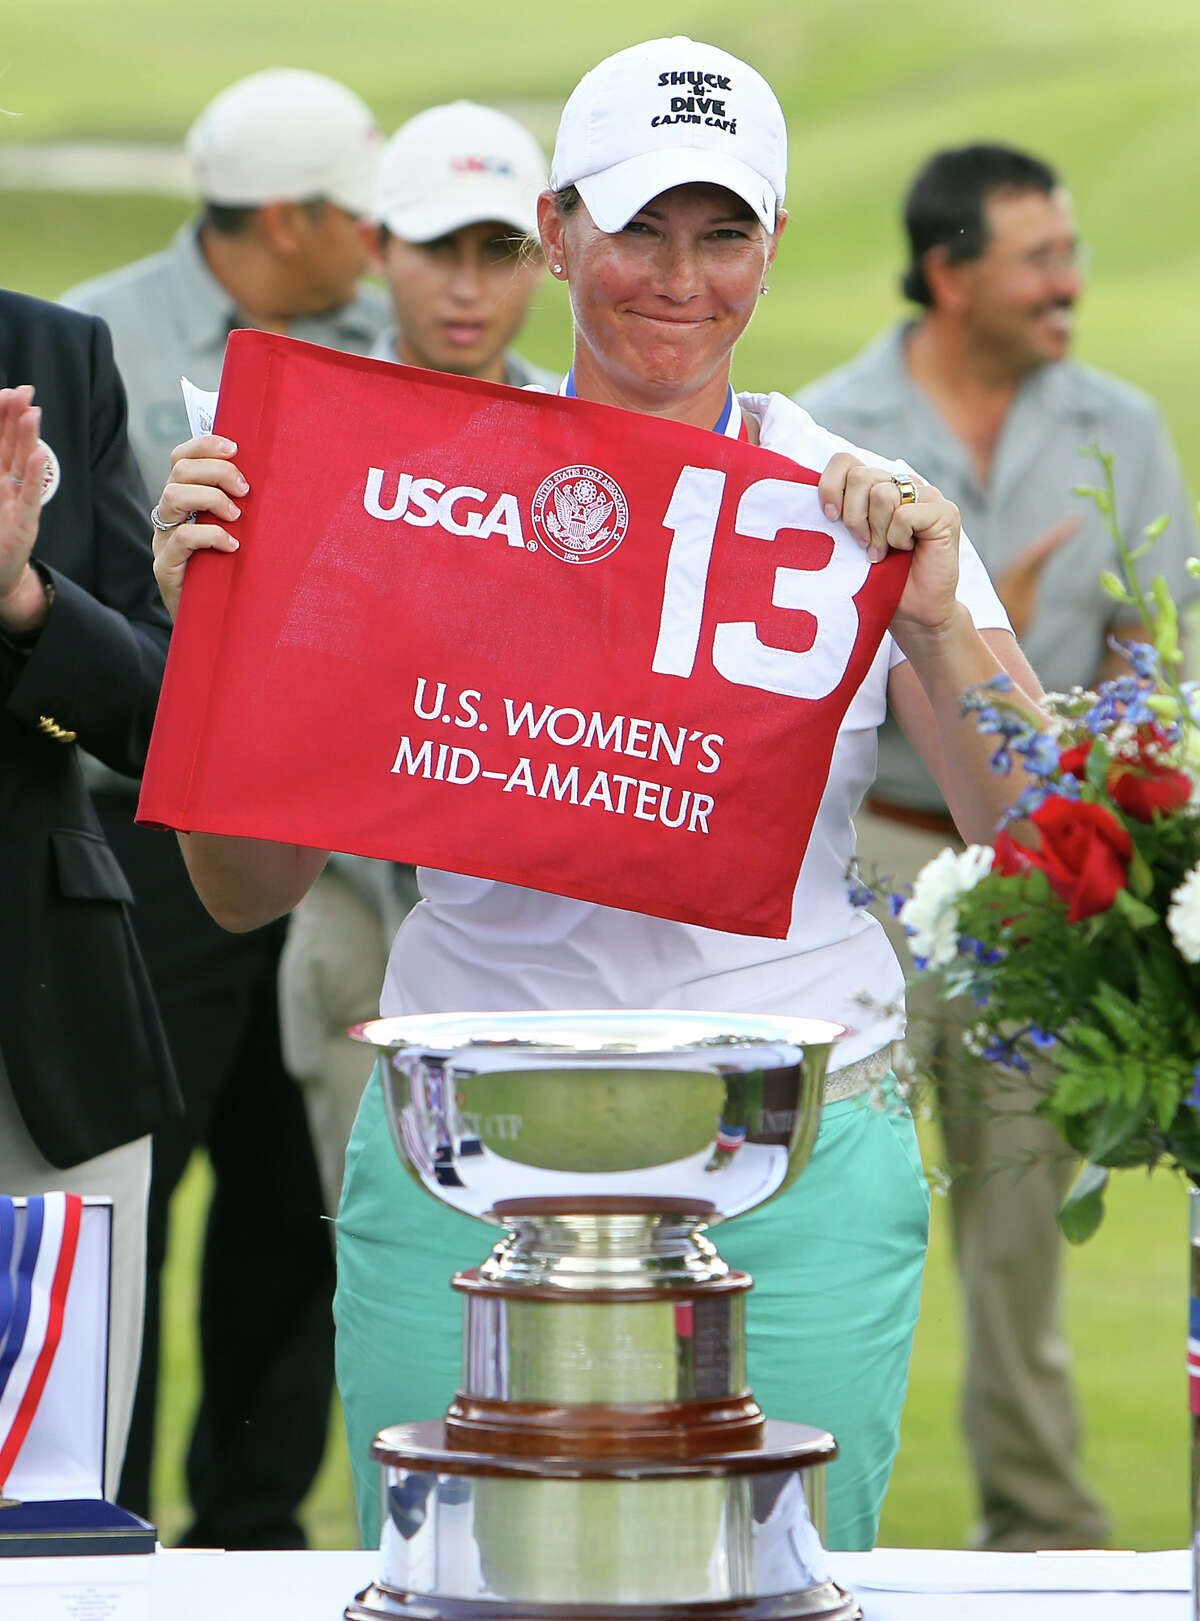 Meghan Stasi of Oakland Park, Florida shows the flag at the hole which she eventually defeated Liz Waynick of Scottsdale, Arizona, 6&5, during the trophy presentation at the USGA U.S. Women's Mid-Amateur Championships at Briggs Ranch Golf Club on Thursday, Oct. 11, 2012. Stasi won the title for the fourth time.